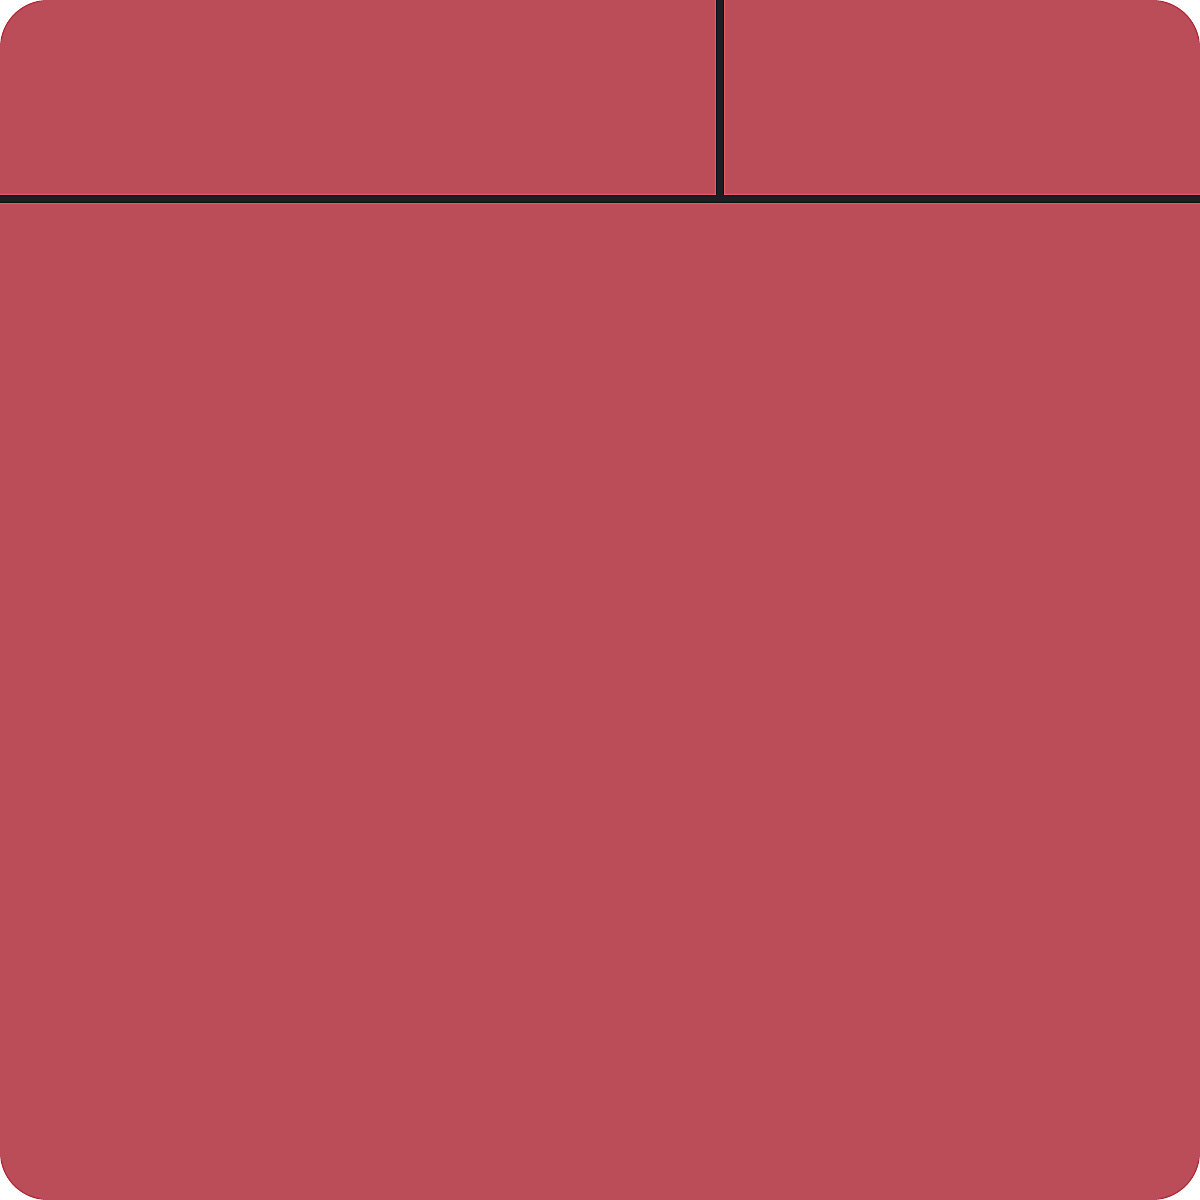 Post-it notes, magnetic, LxW 75 x 75 mm, pack of 10, red-11